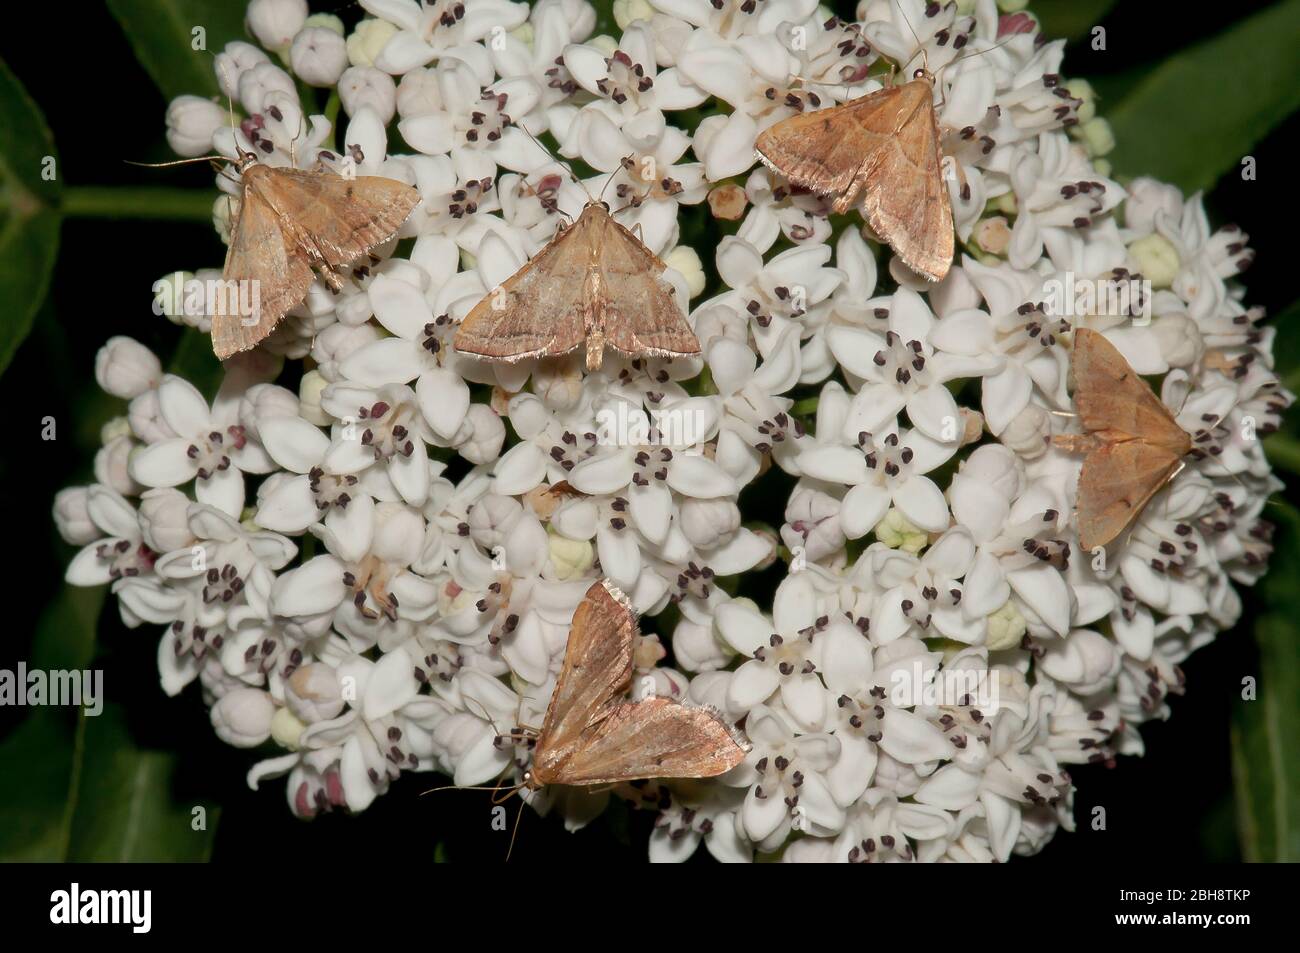 Several small pyralid moths, Pyralidae, sitting on white blossoms, sucking nectar, Bavaria, Germany Stock Photo